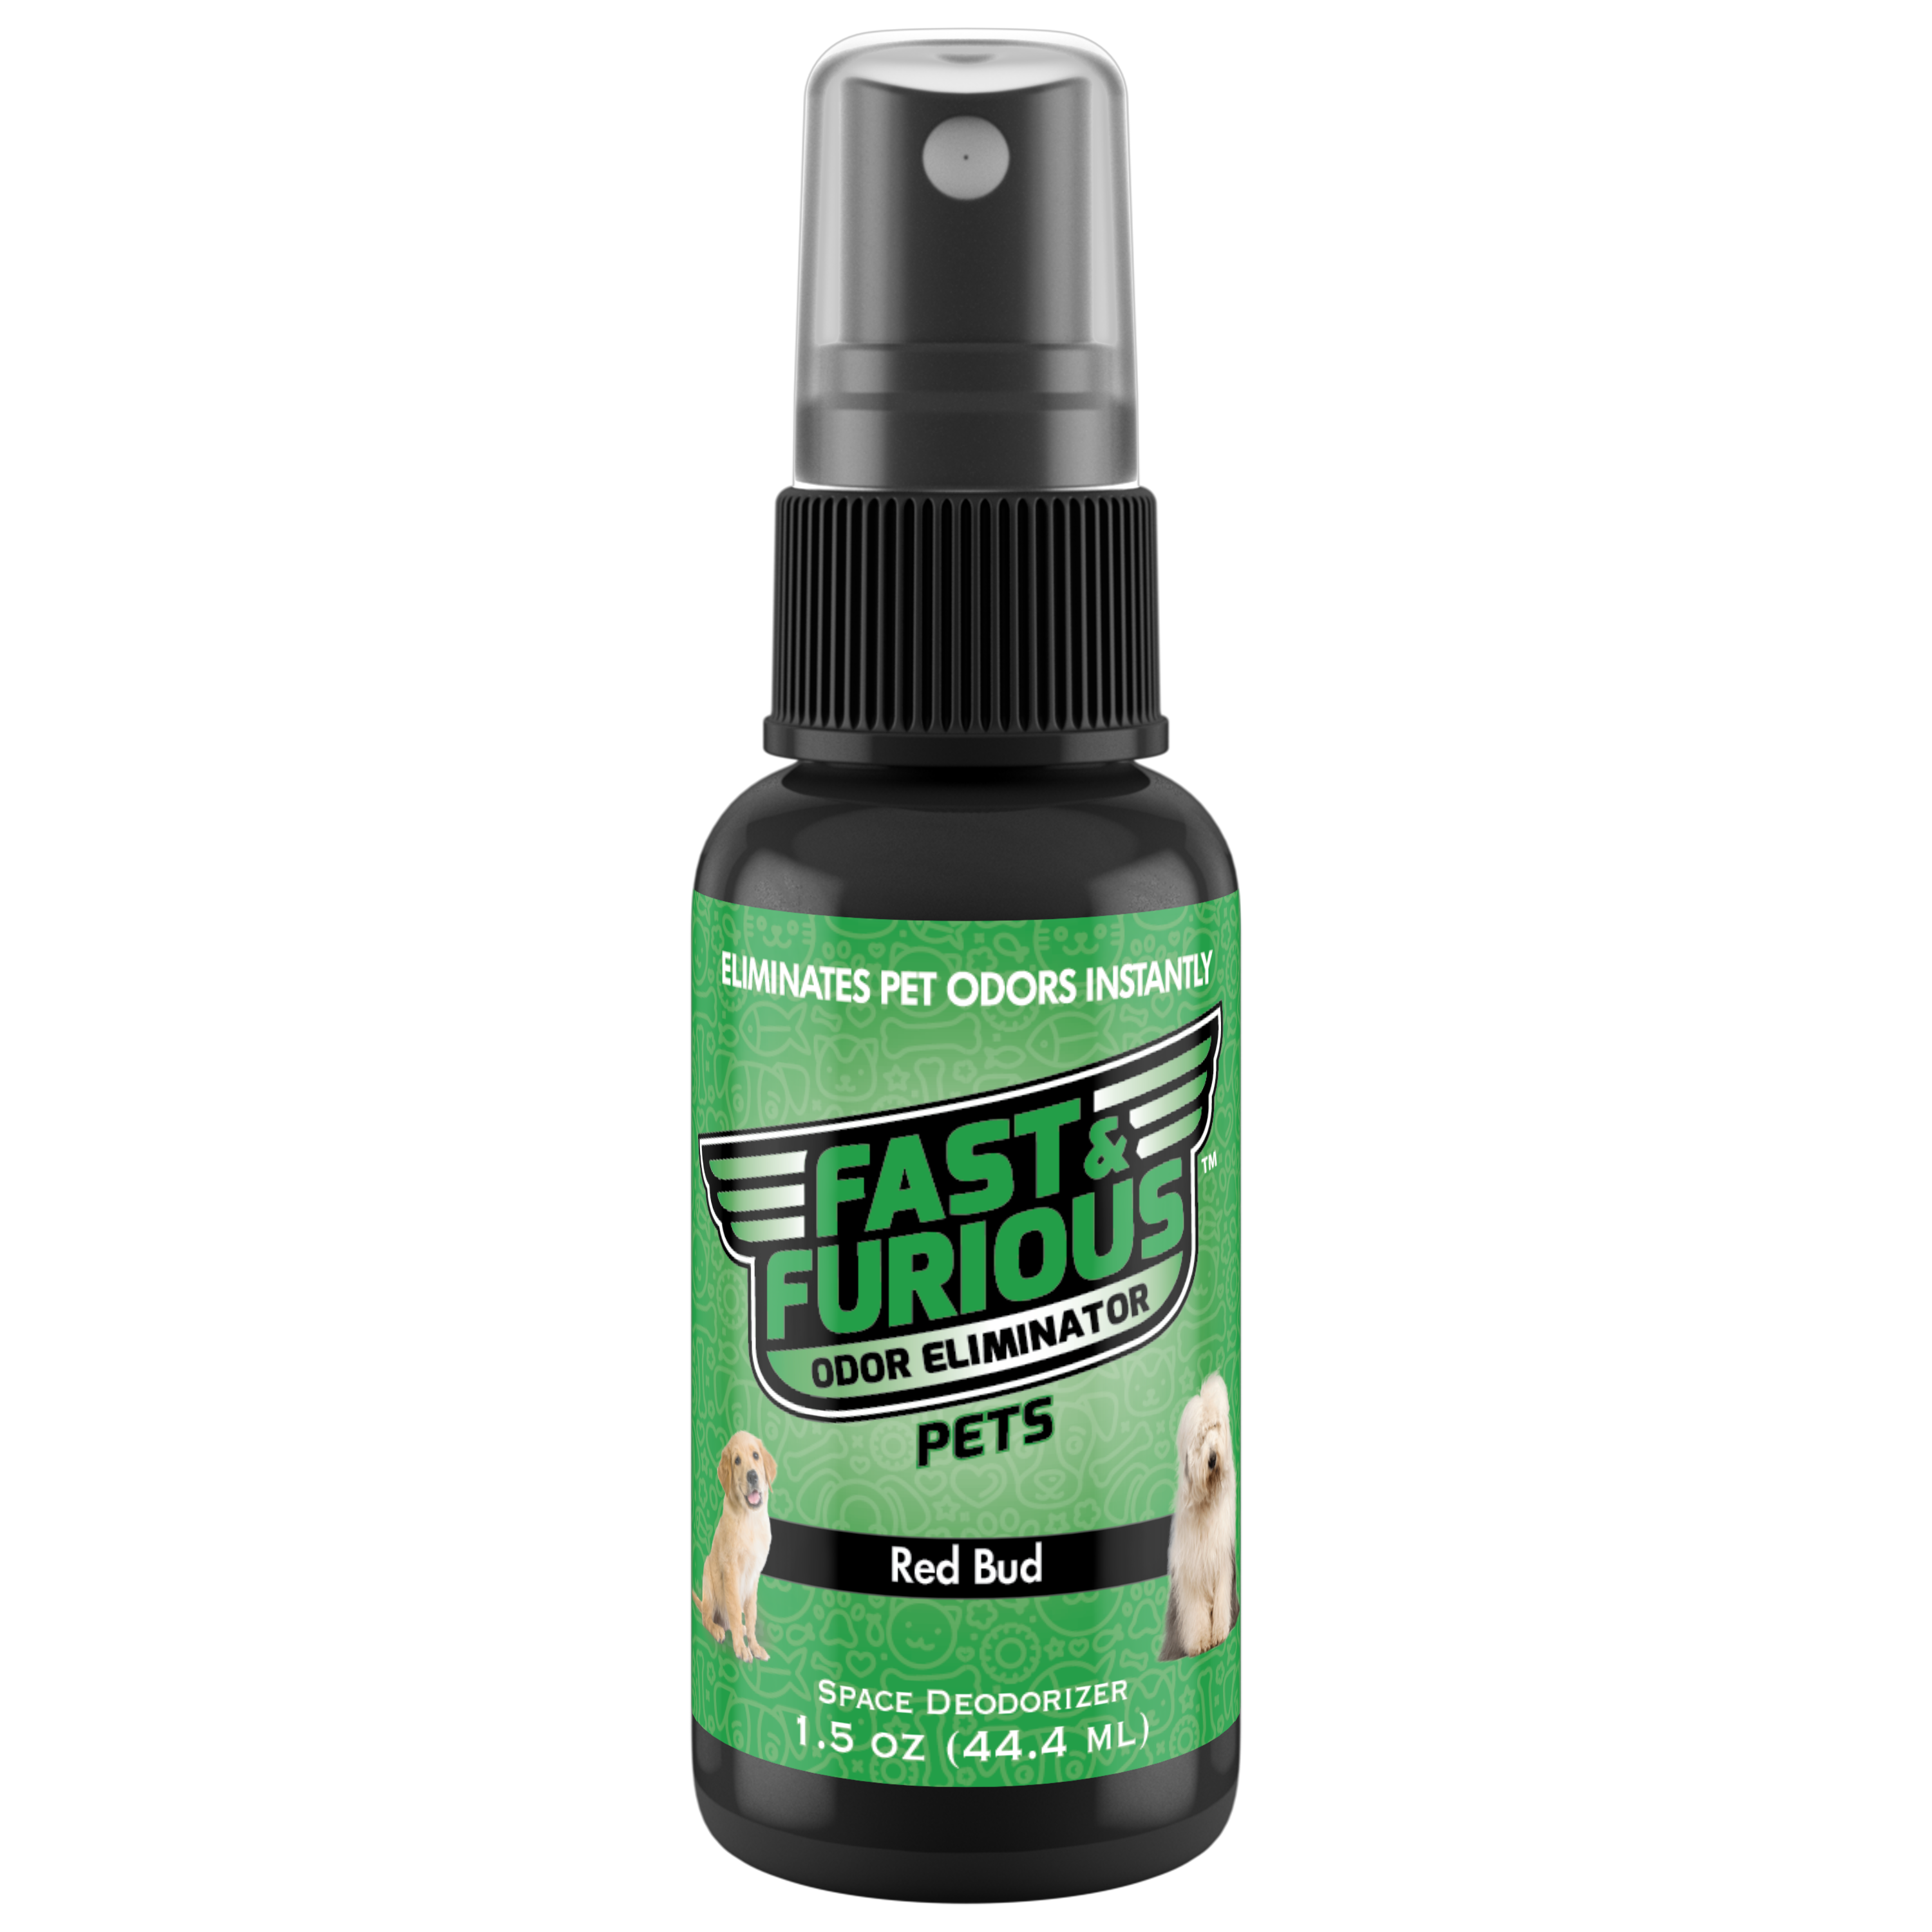 Fast and Furious Pets Odor Eliminator - Red Bud Scent